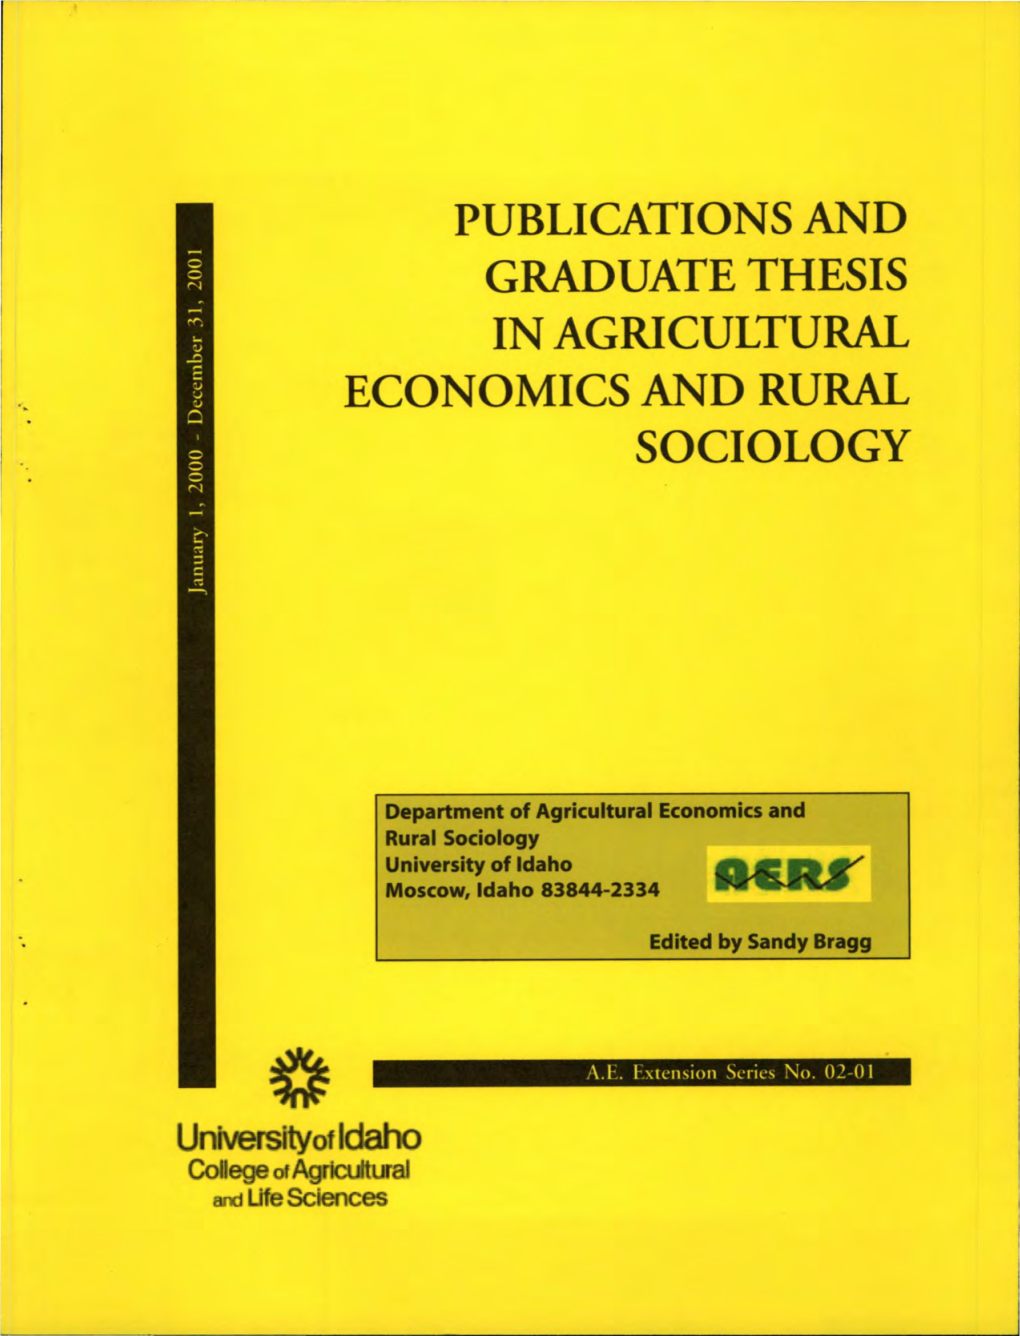 Publications and Graduate Thesis in Agricultural Economics and Rural Sociology